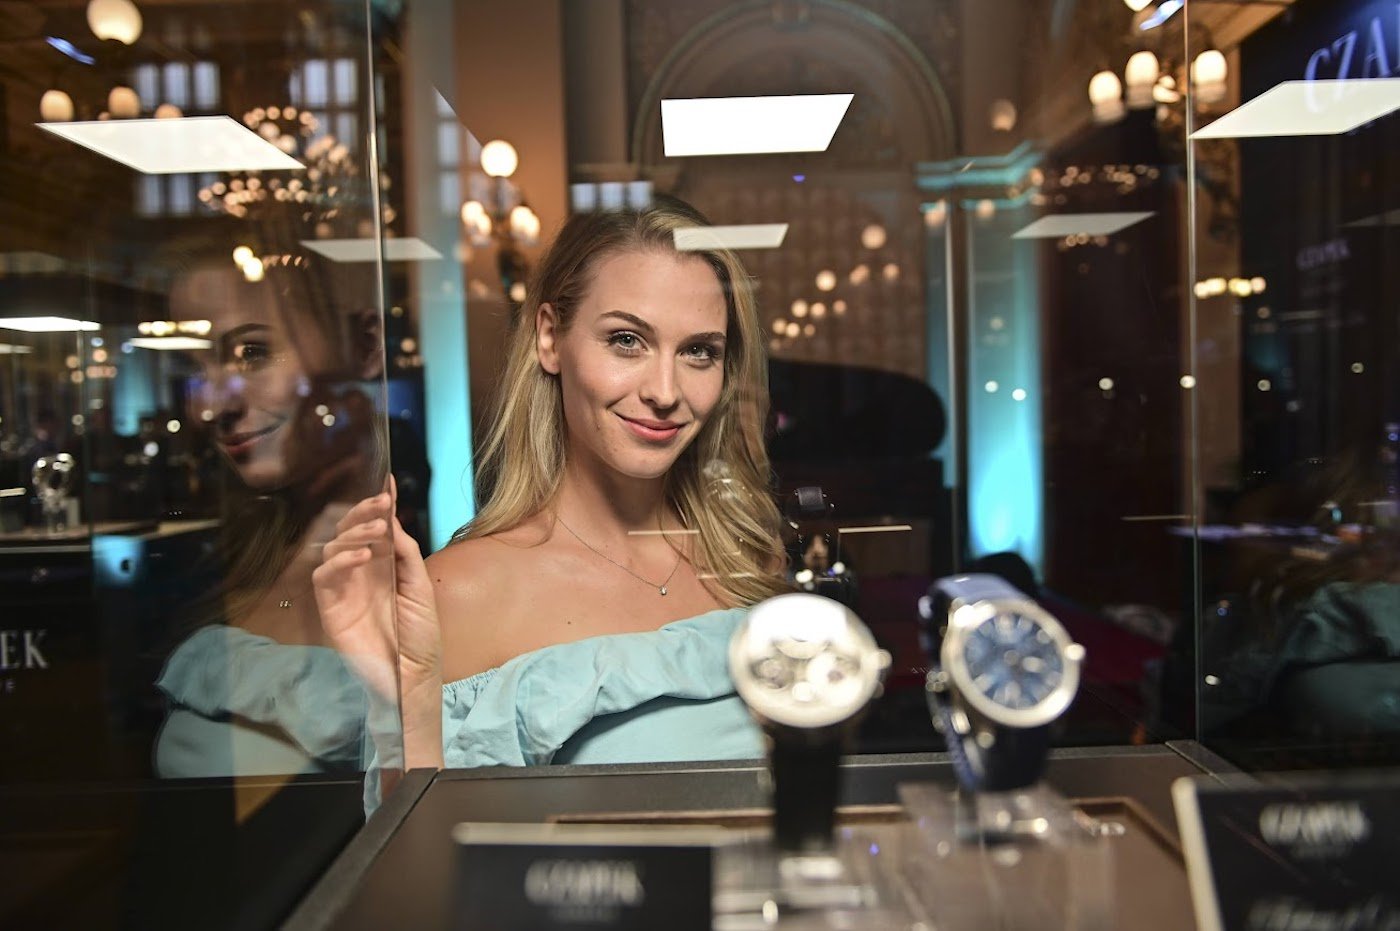 Czech Republic's SEW stages annual watch fair at Žofín Palace in October